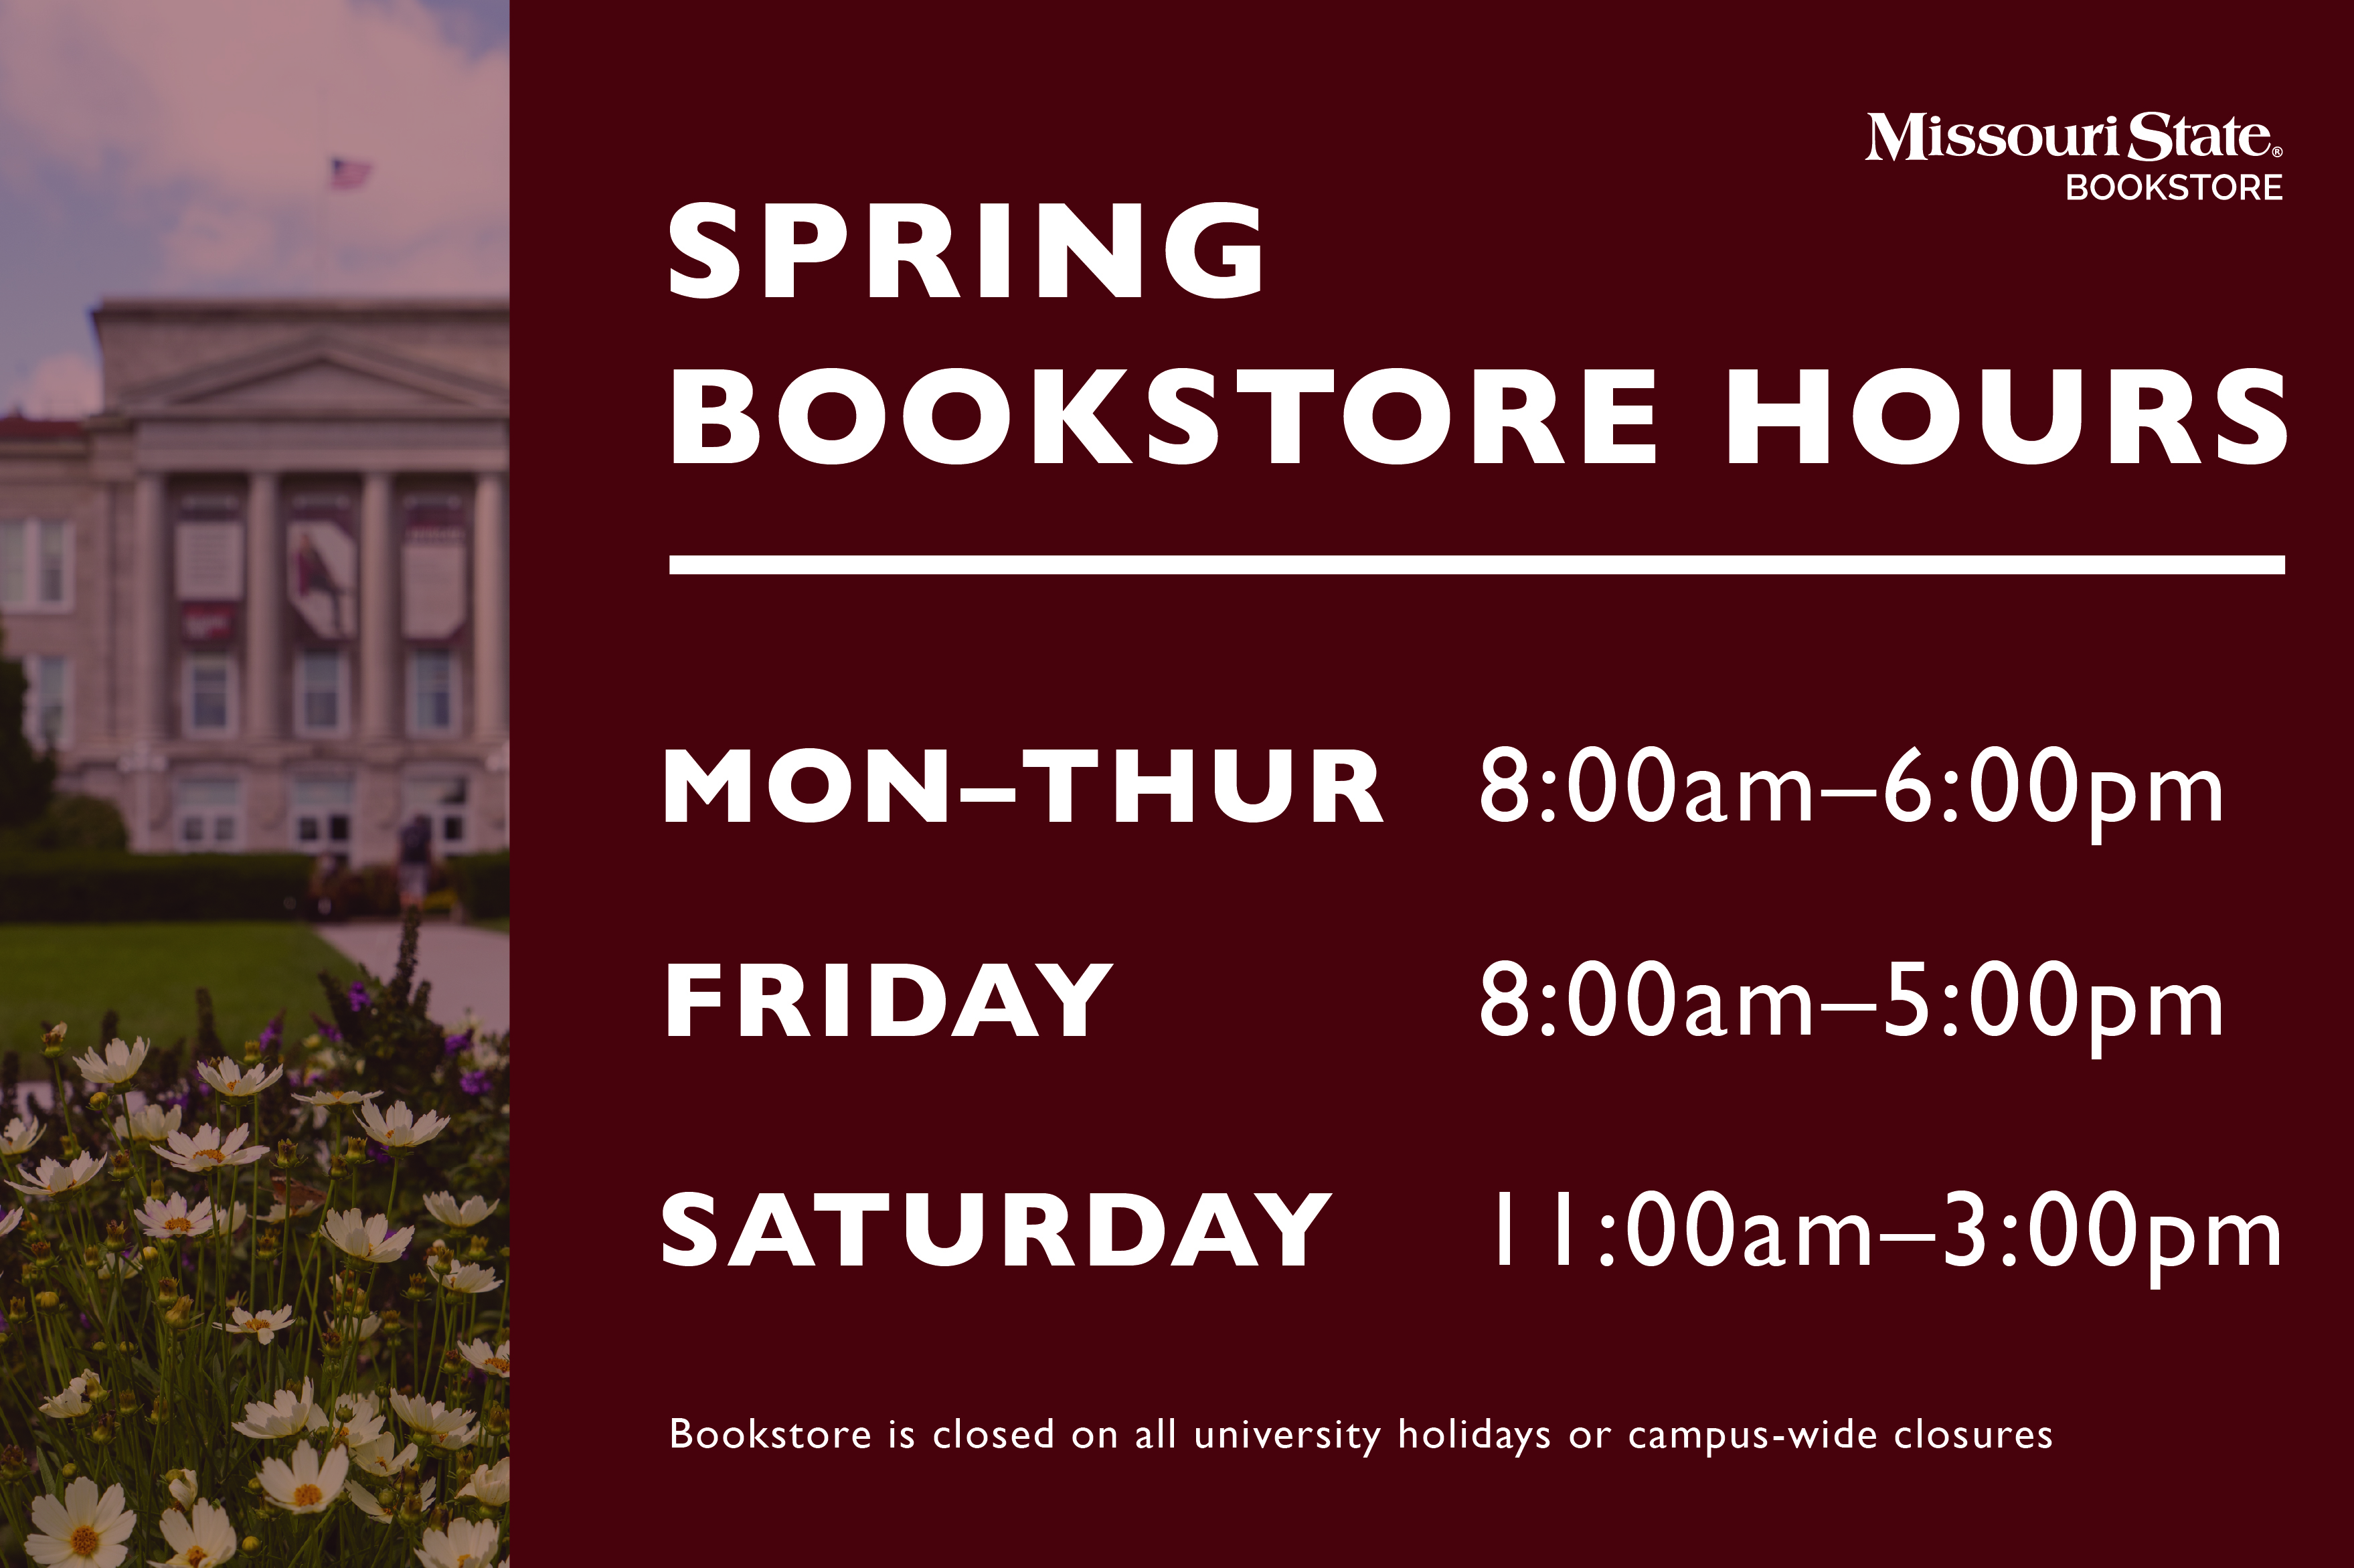 Spring Bookstore Hours, Monday - Thursday 8:00 am - 6:00 pm, Friday 8:00 am - 5:00 pm, Saturday 11:00 am - 3:00 pm, Bookstore is closed on all university holidays or campus-wide closures.